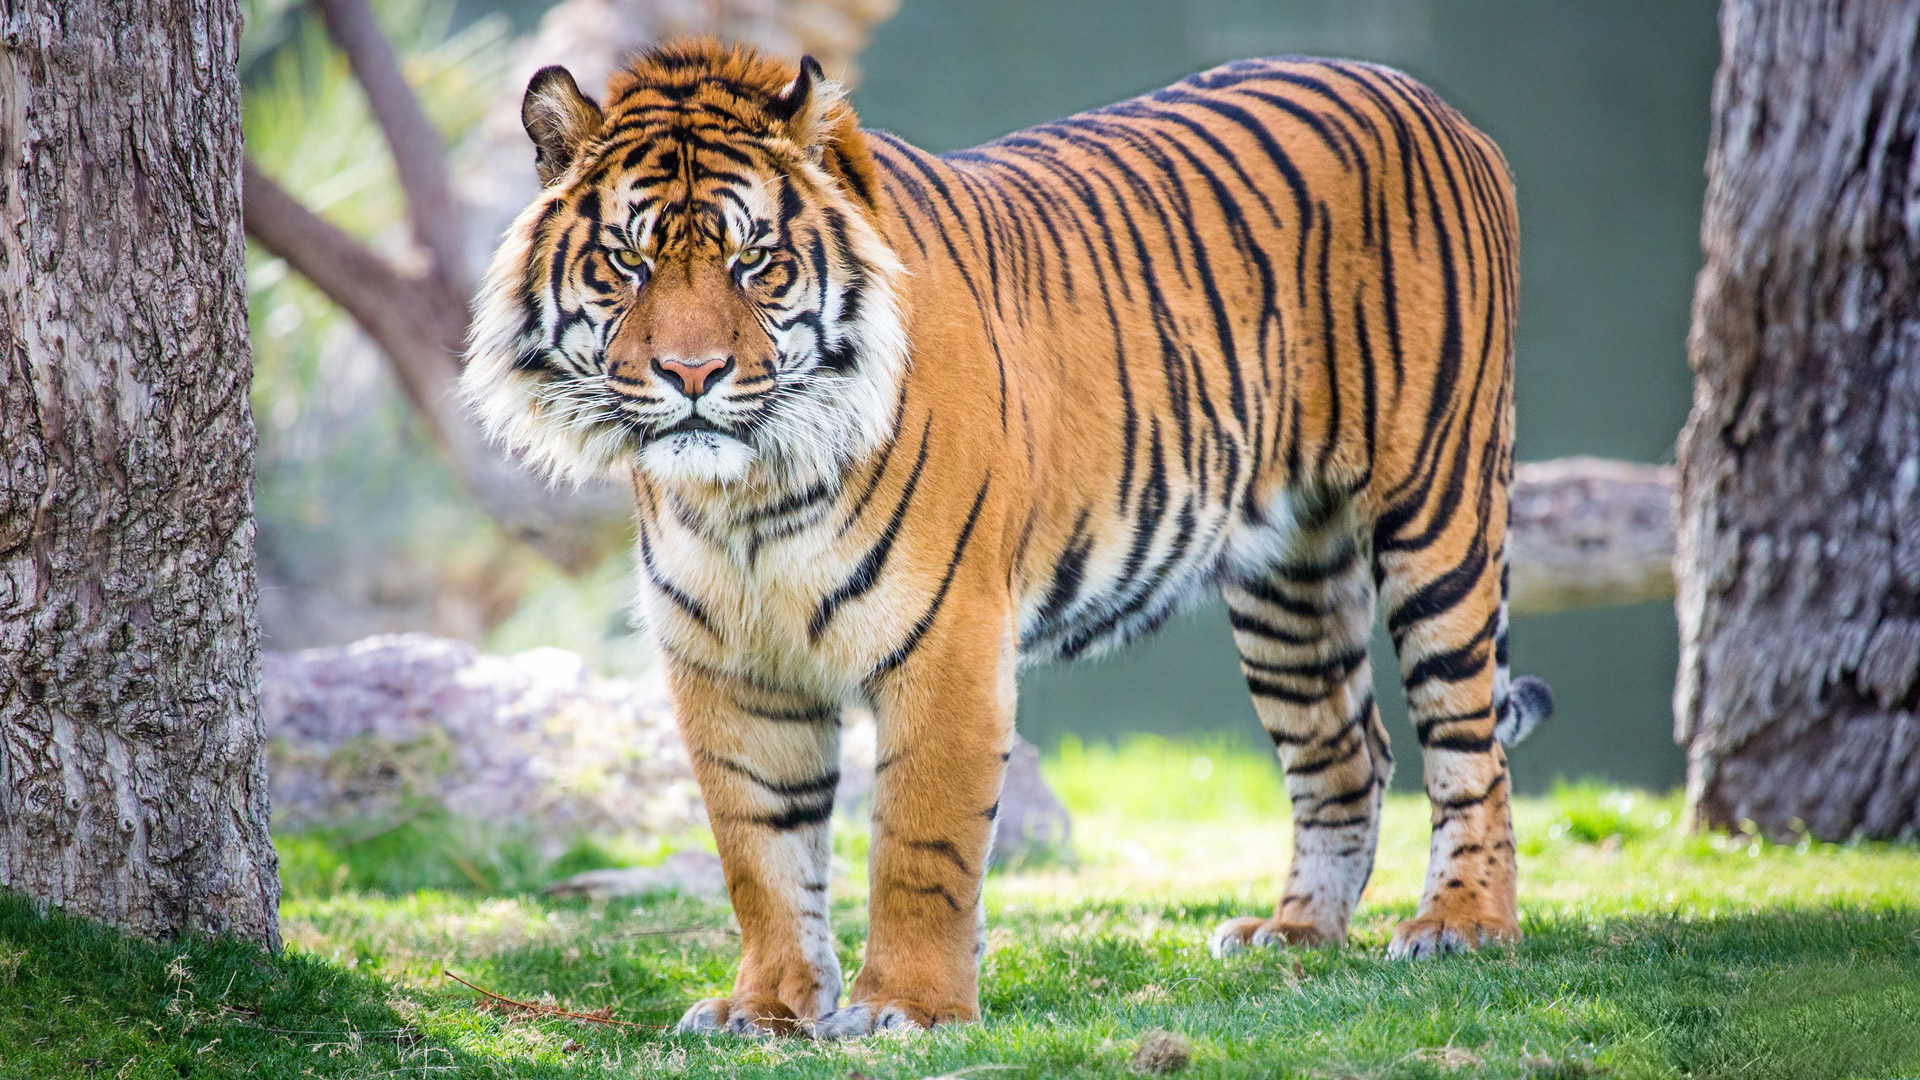 Tiger free download hd wallpapers Only hd wallpapers